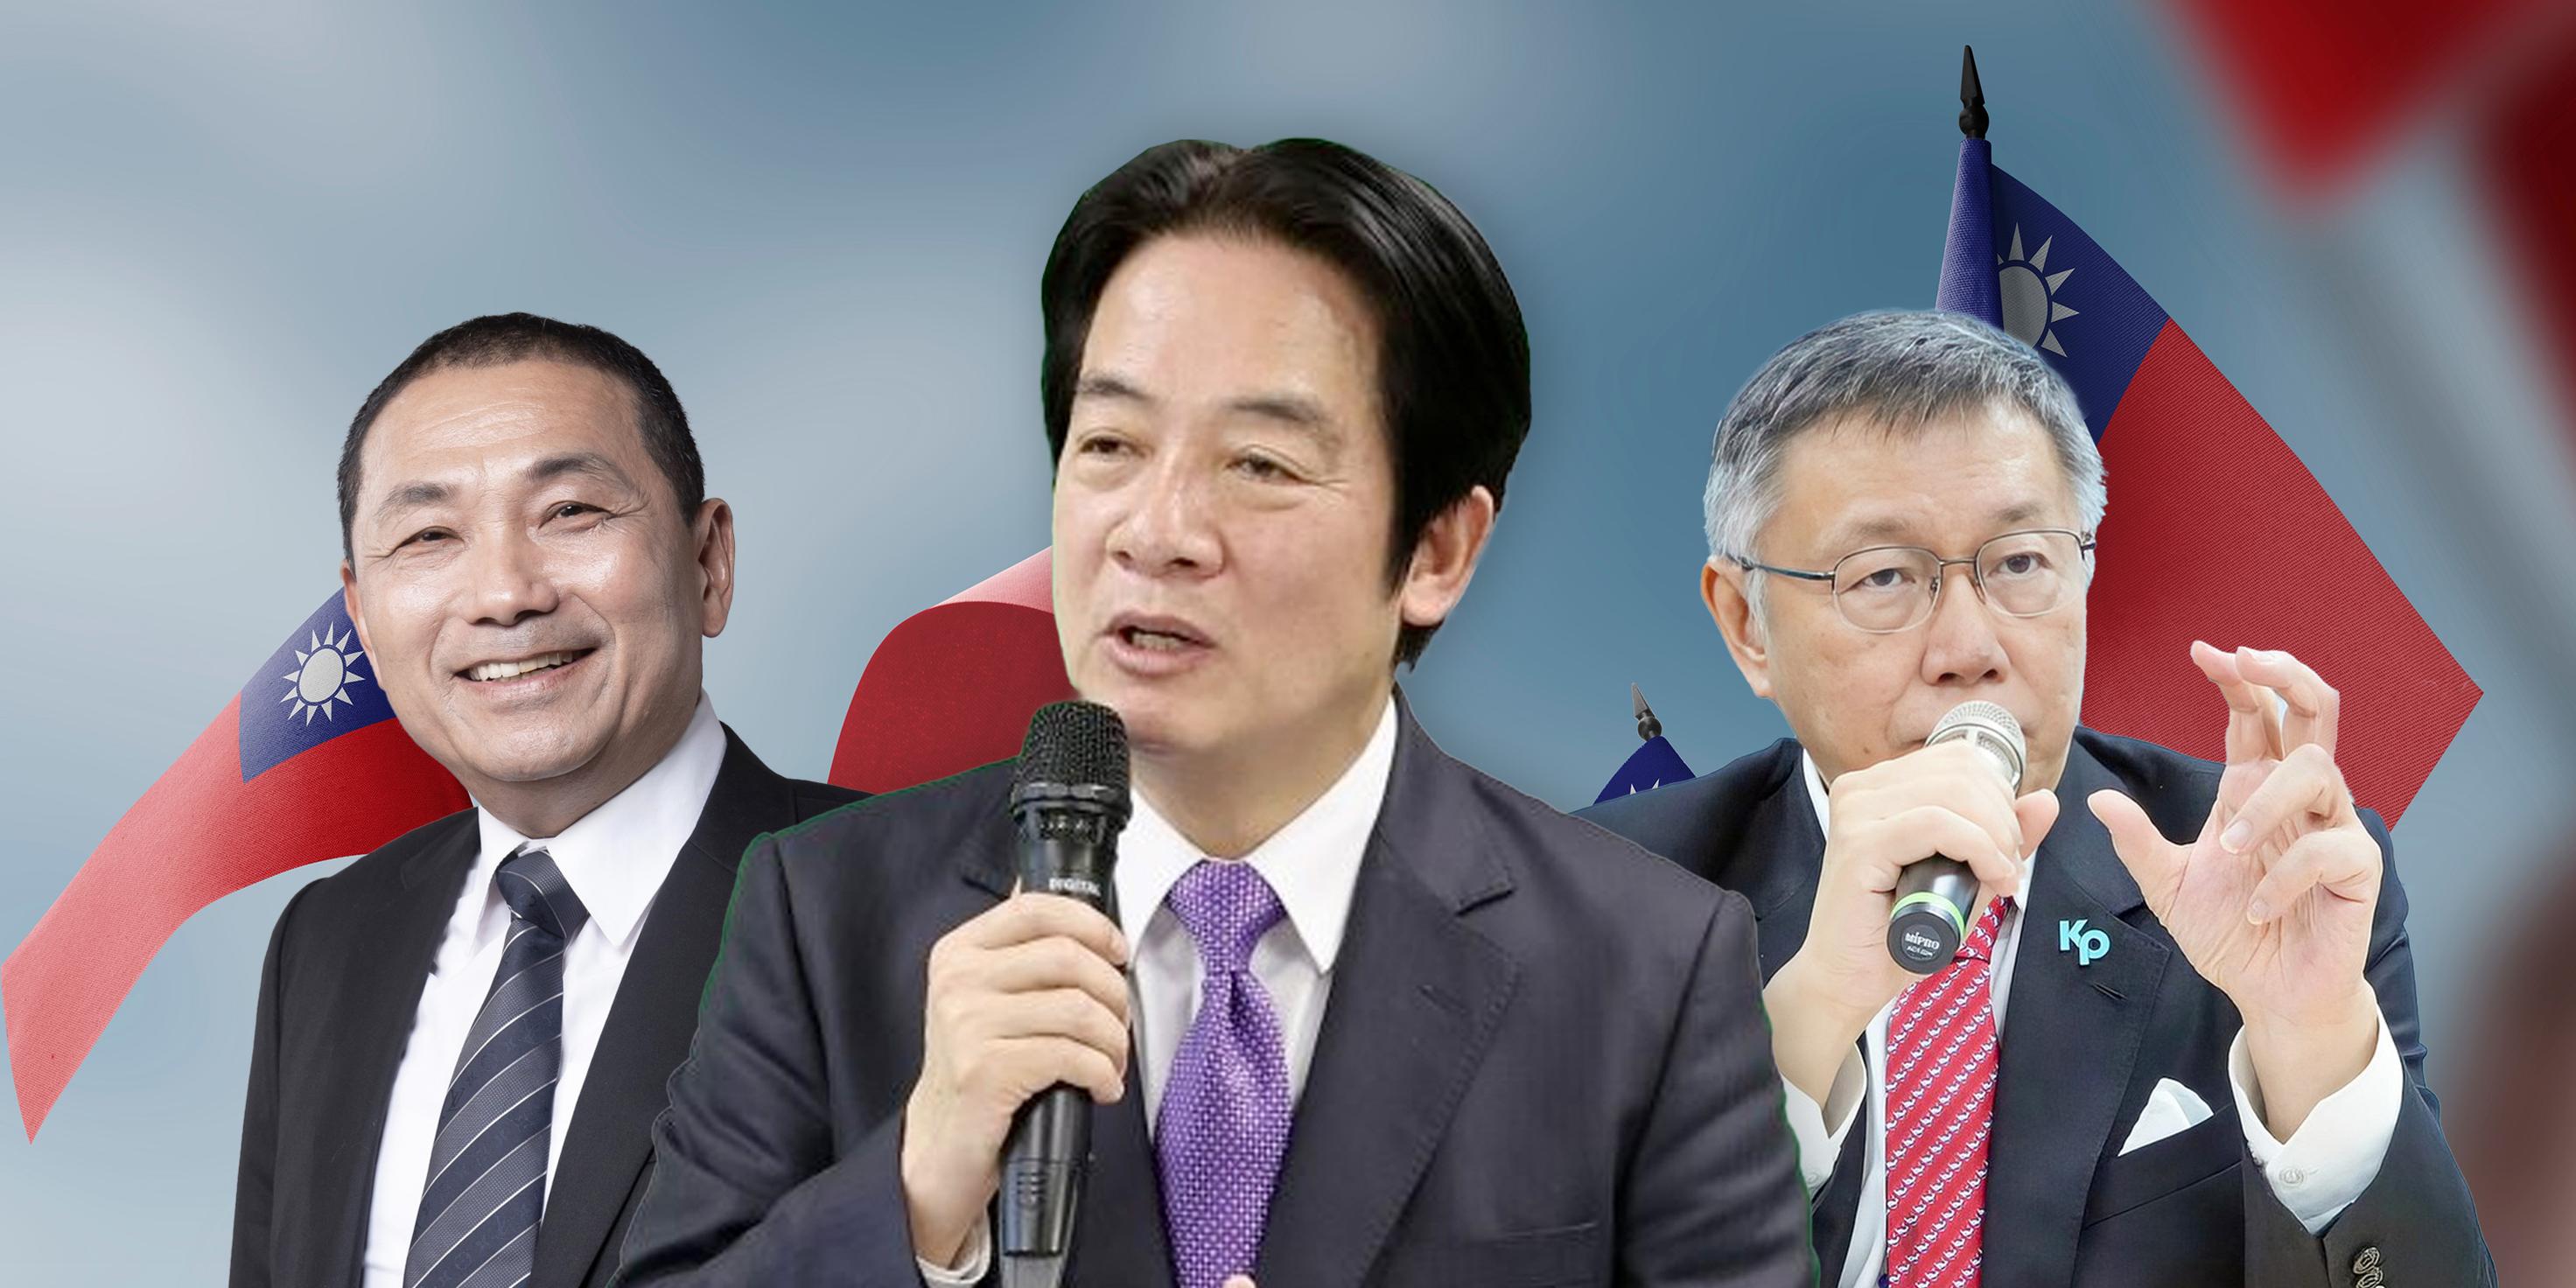 How Will the Approaches of the Presidential Candidates Affect Taiwan’s Future?